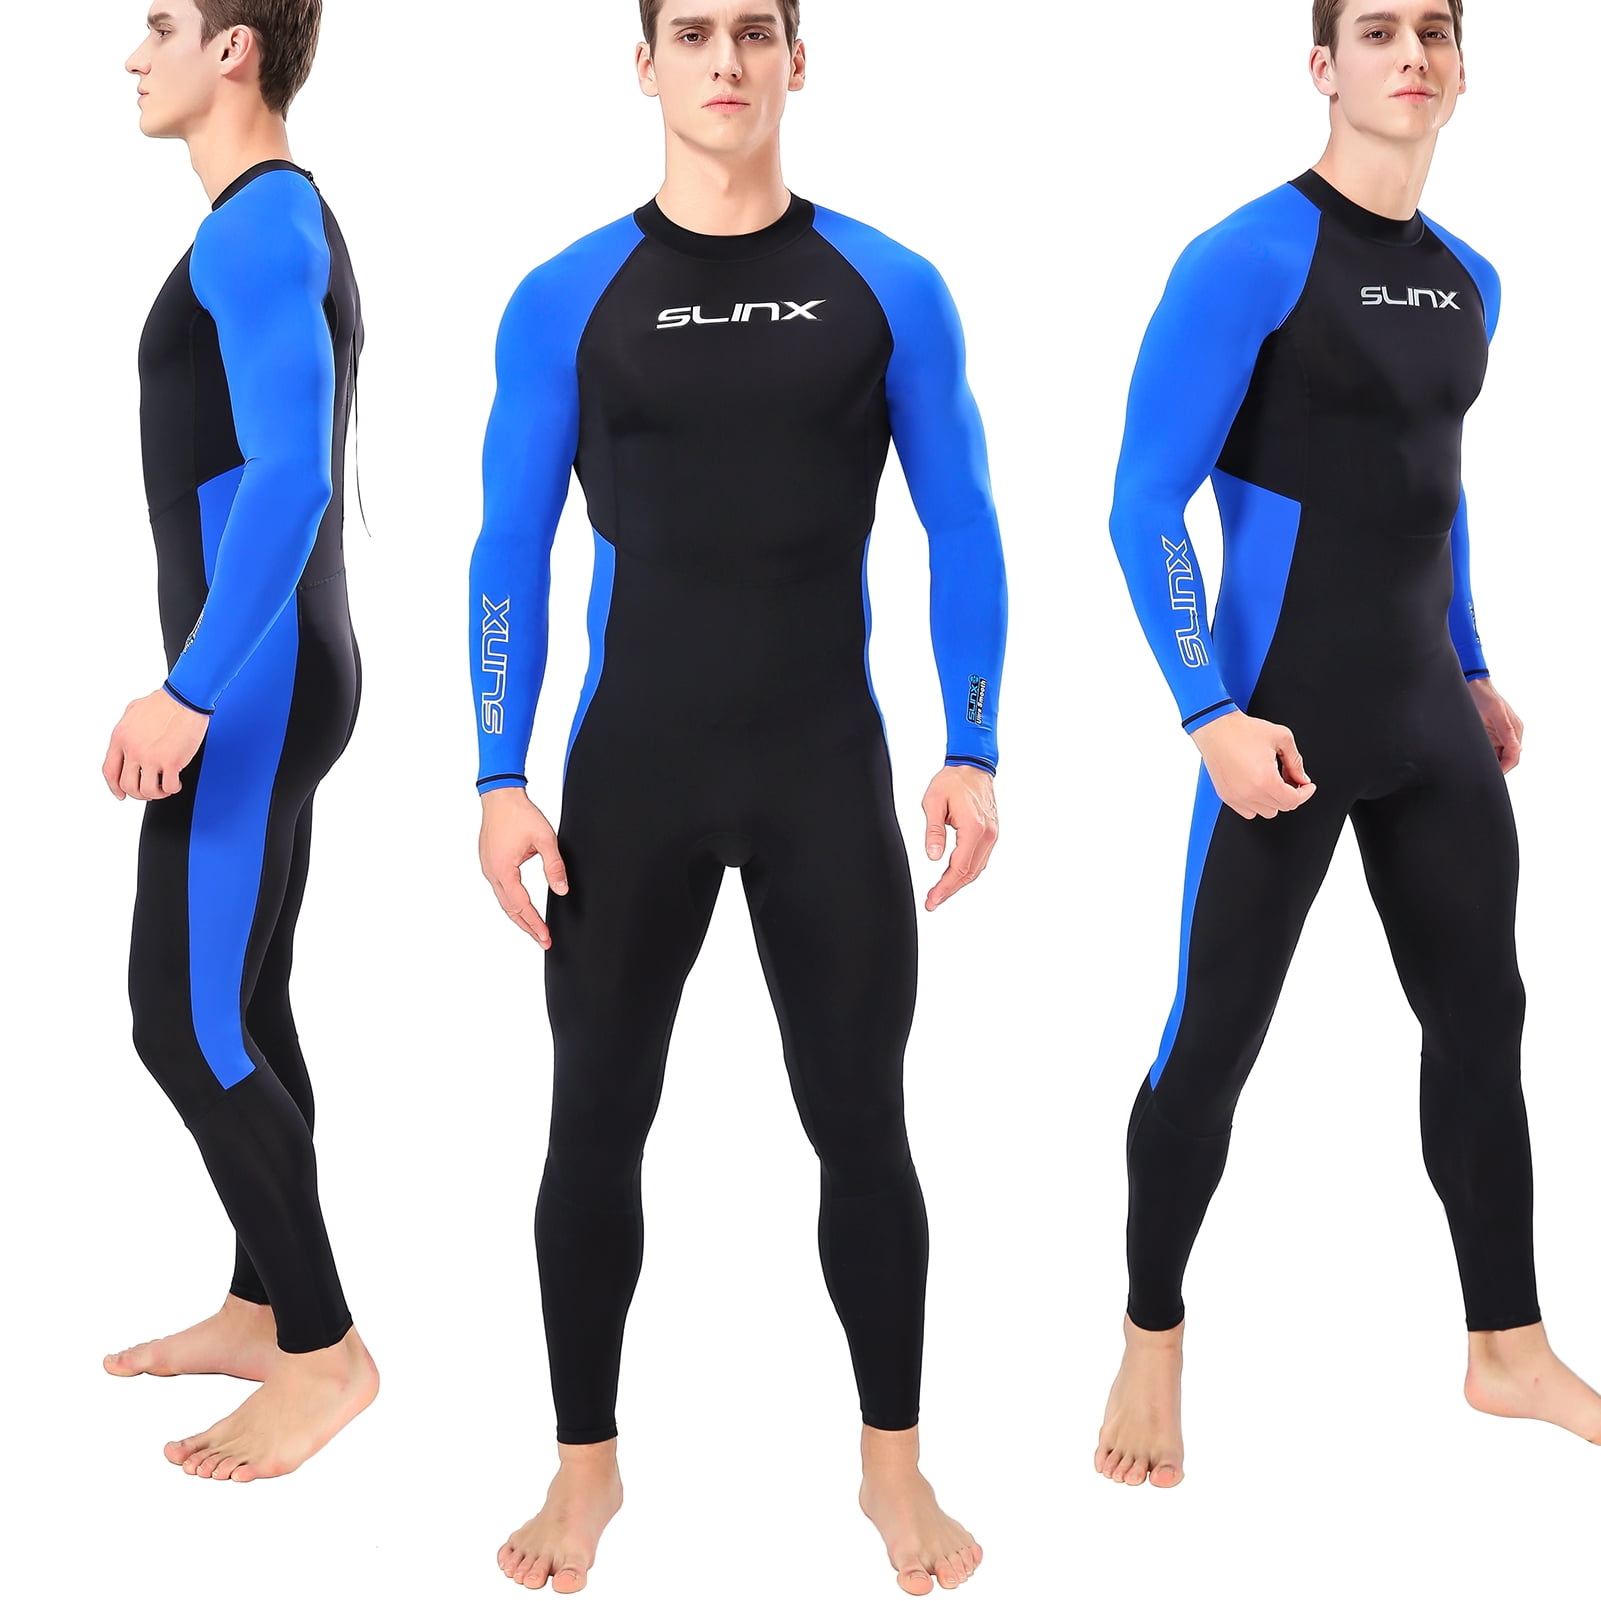 Details about   3mm Neoprene Men Full Body Wetsuit Super Stretch Scuba Diving Swimming Warm Suit 